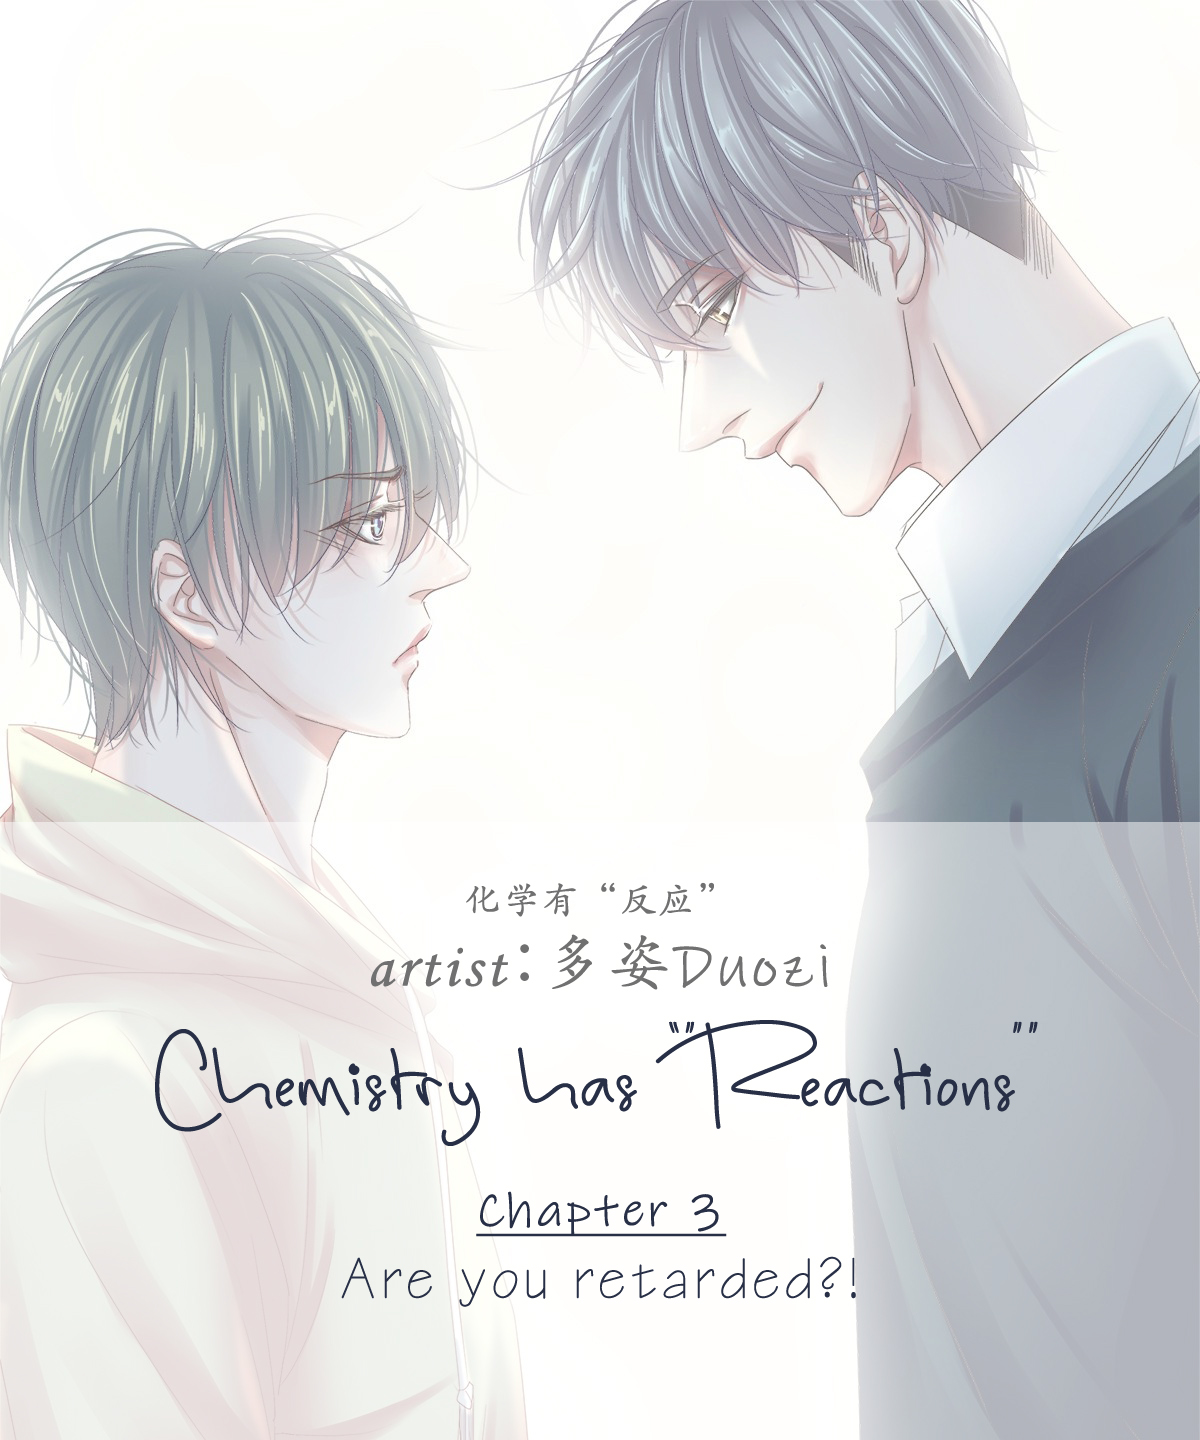 Chemistry has "Reactions" Vol. 1 Ch. 3